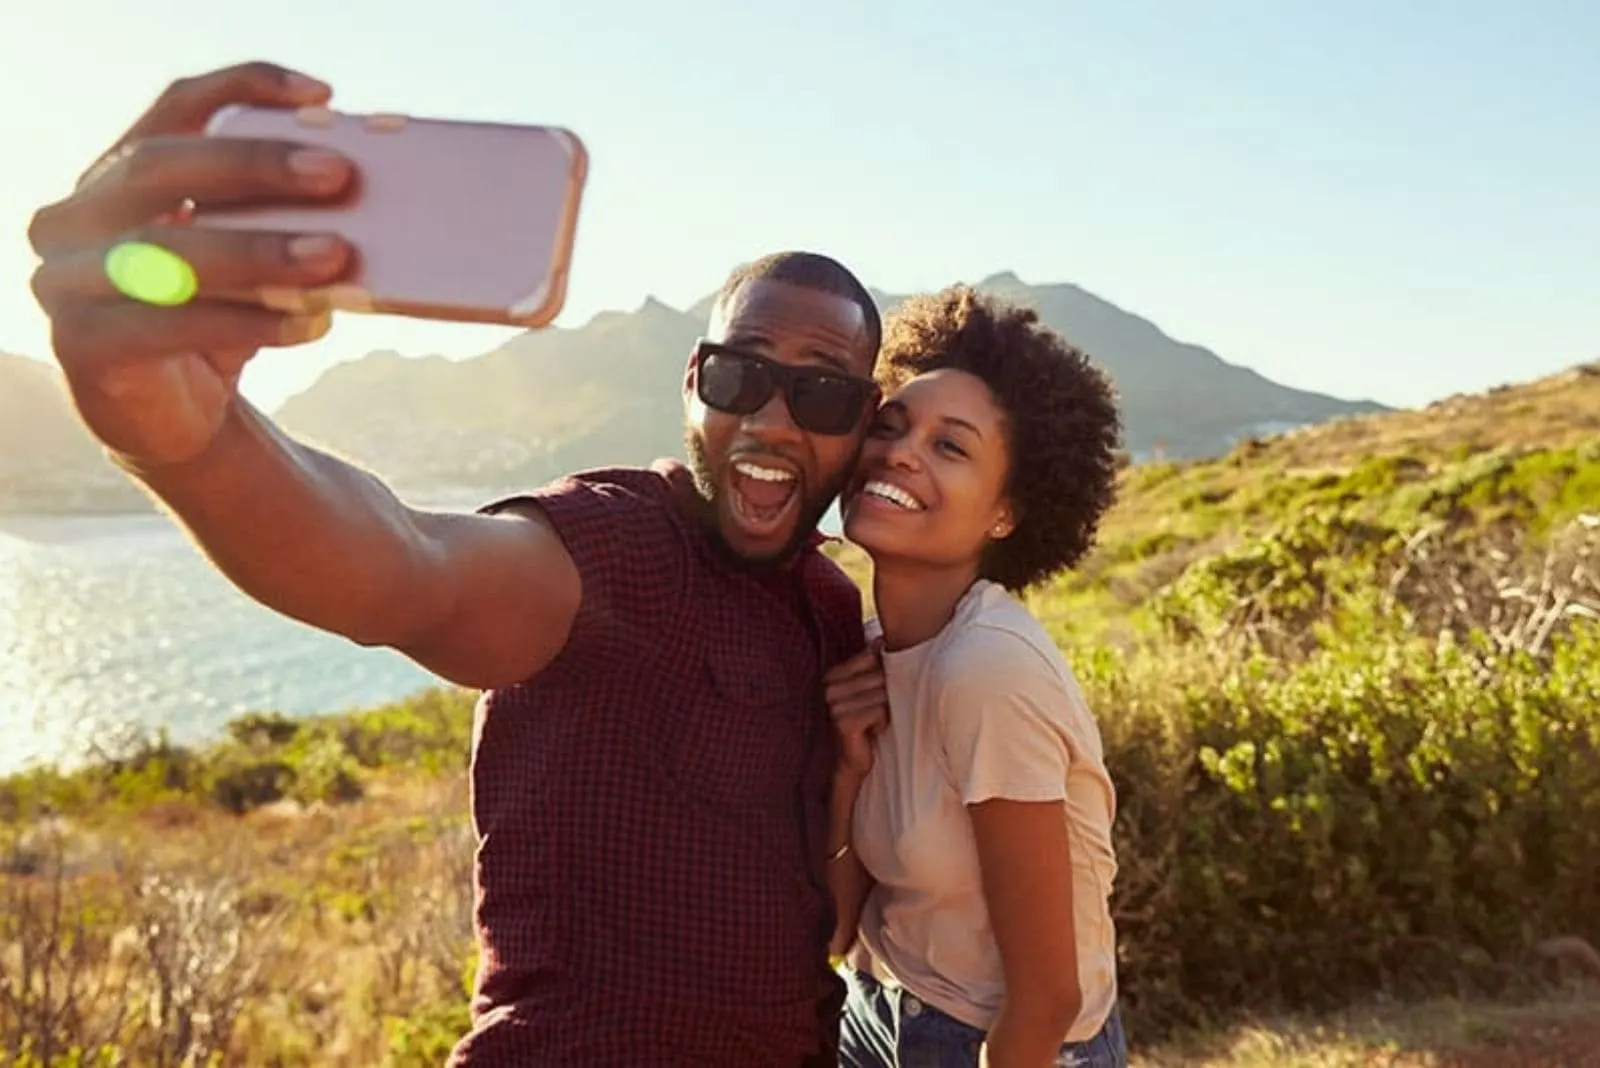 a man takes a picture with a woman